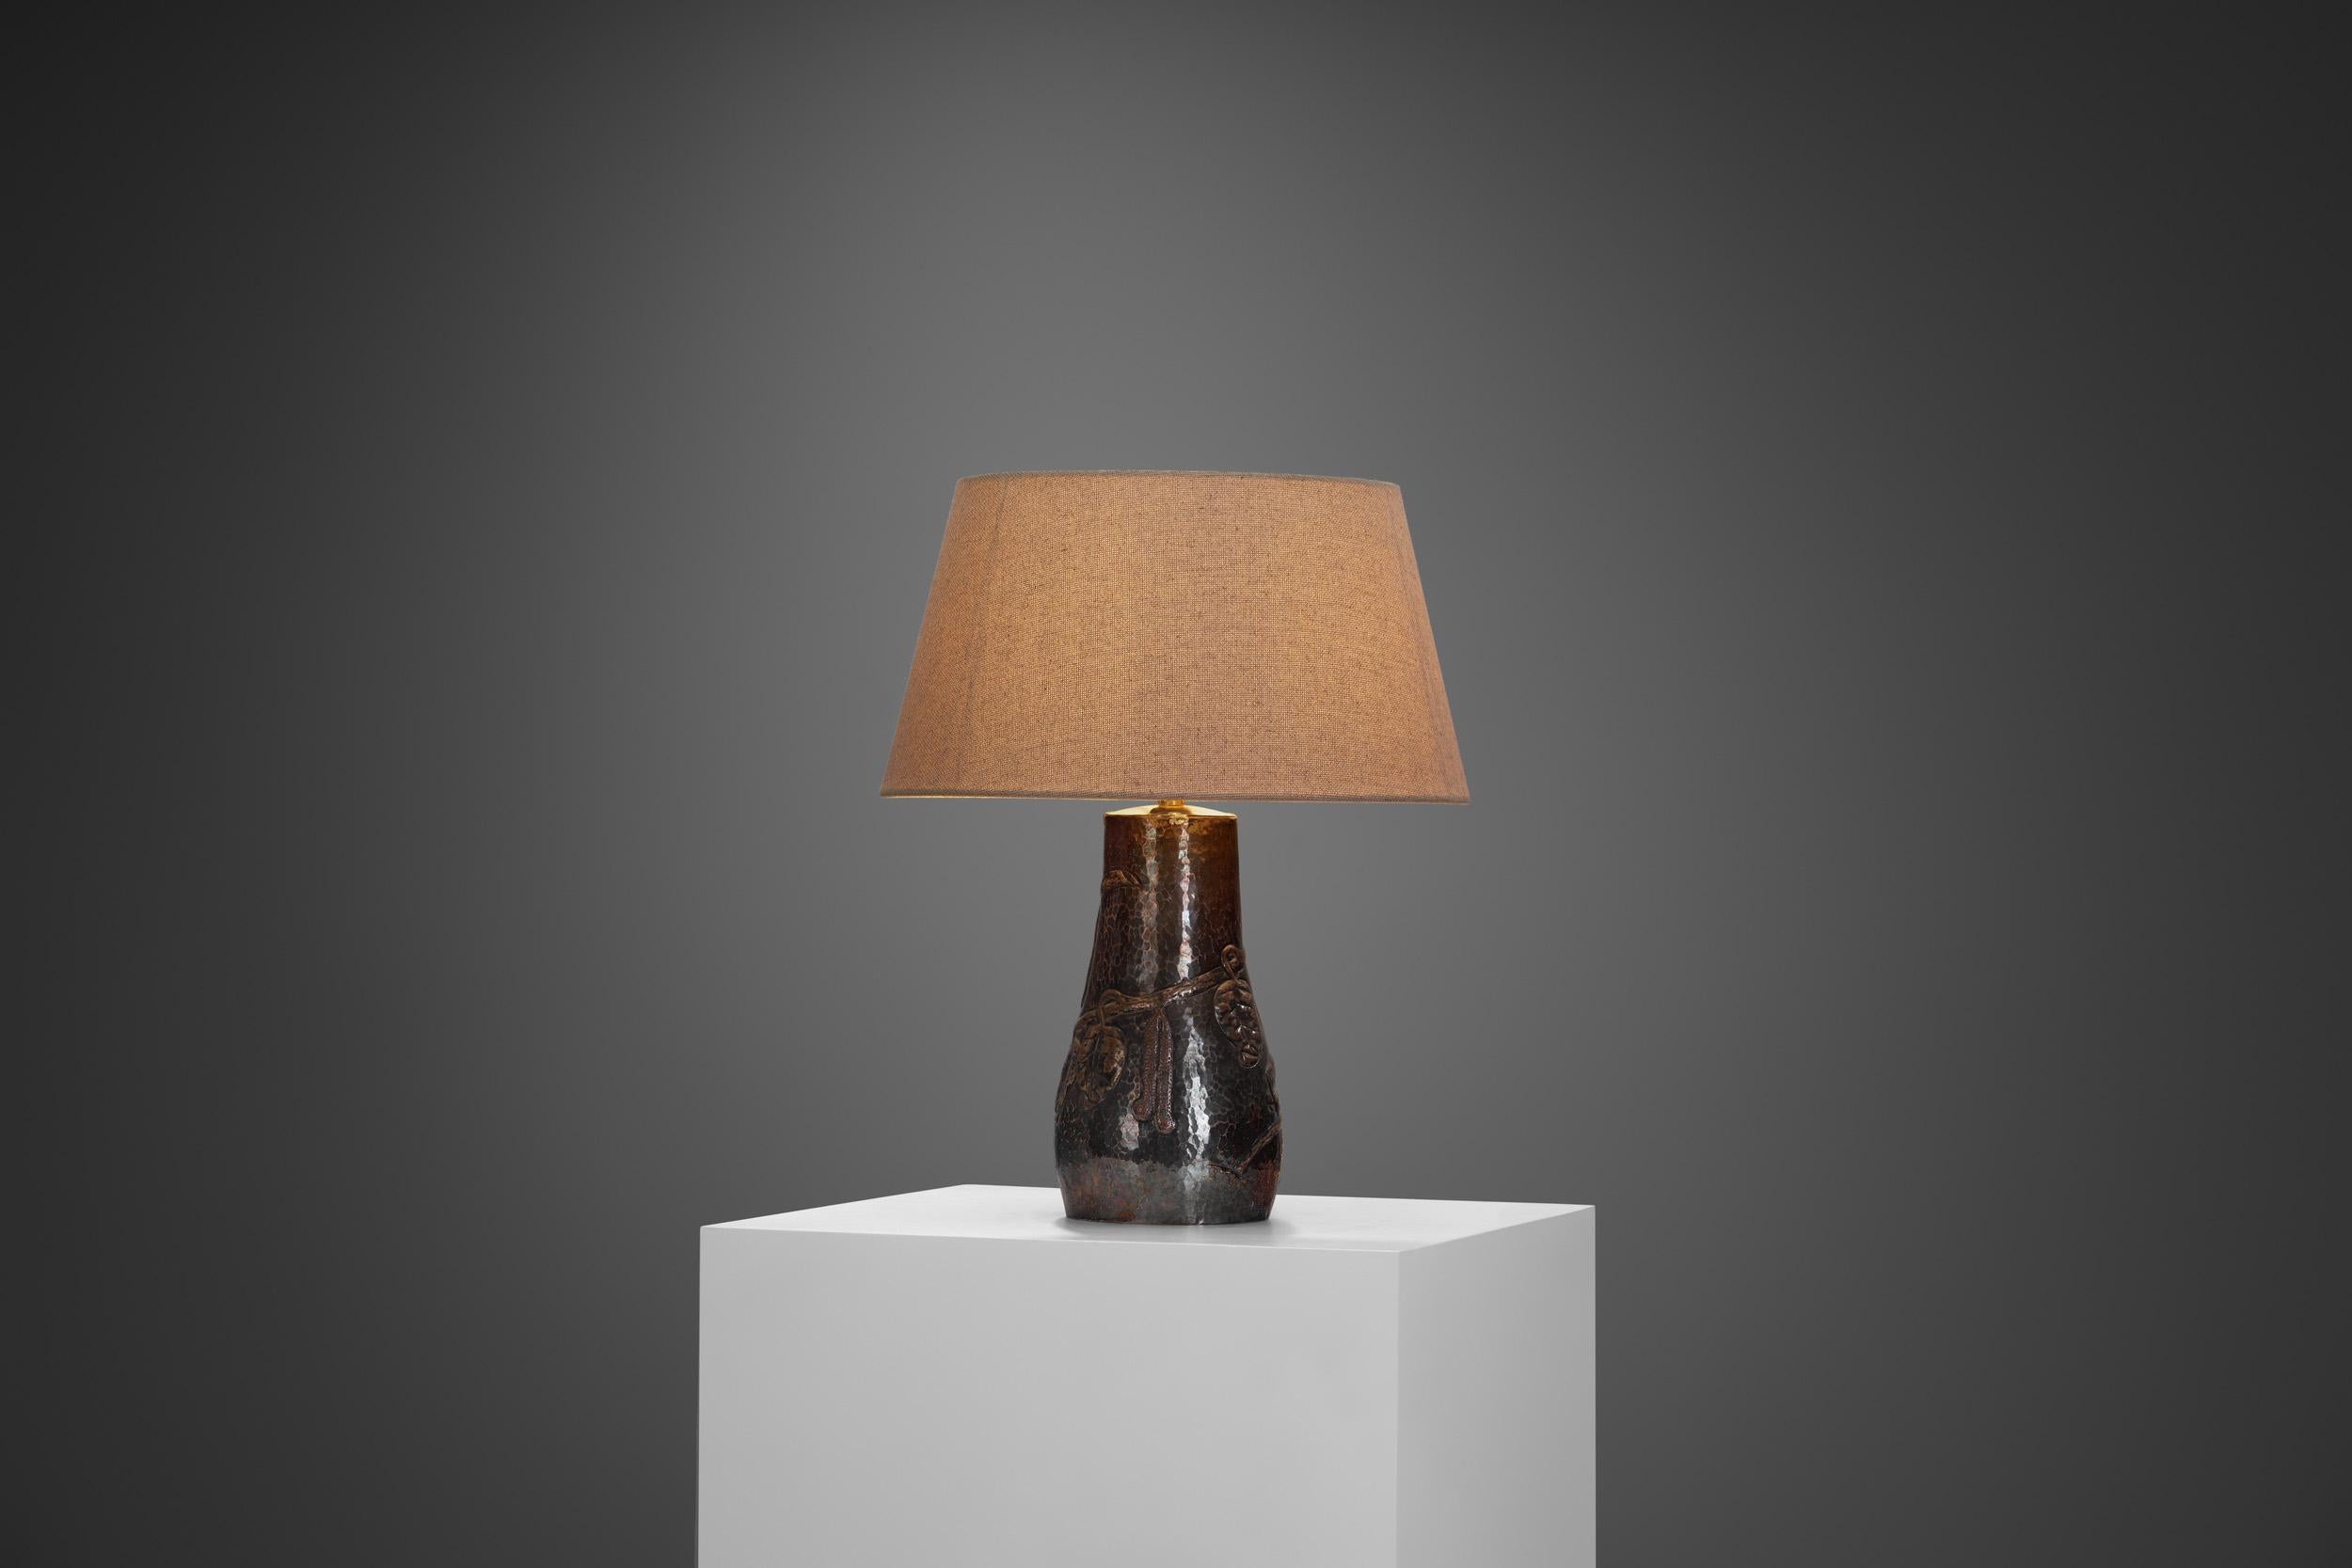 Lighting is a highlight of Swedish design, ranging from the warm, low light of a candle to the soft yet bright glow of a table lamp. This lamp is a delightfully distinctive model, with immediately recognizable details. Design in the mid-century